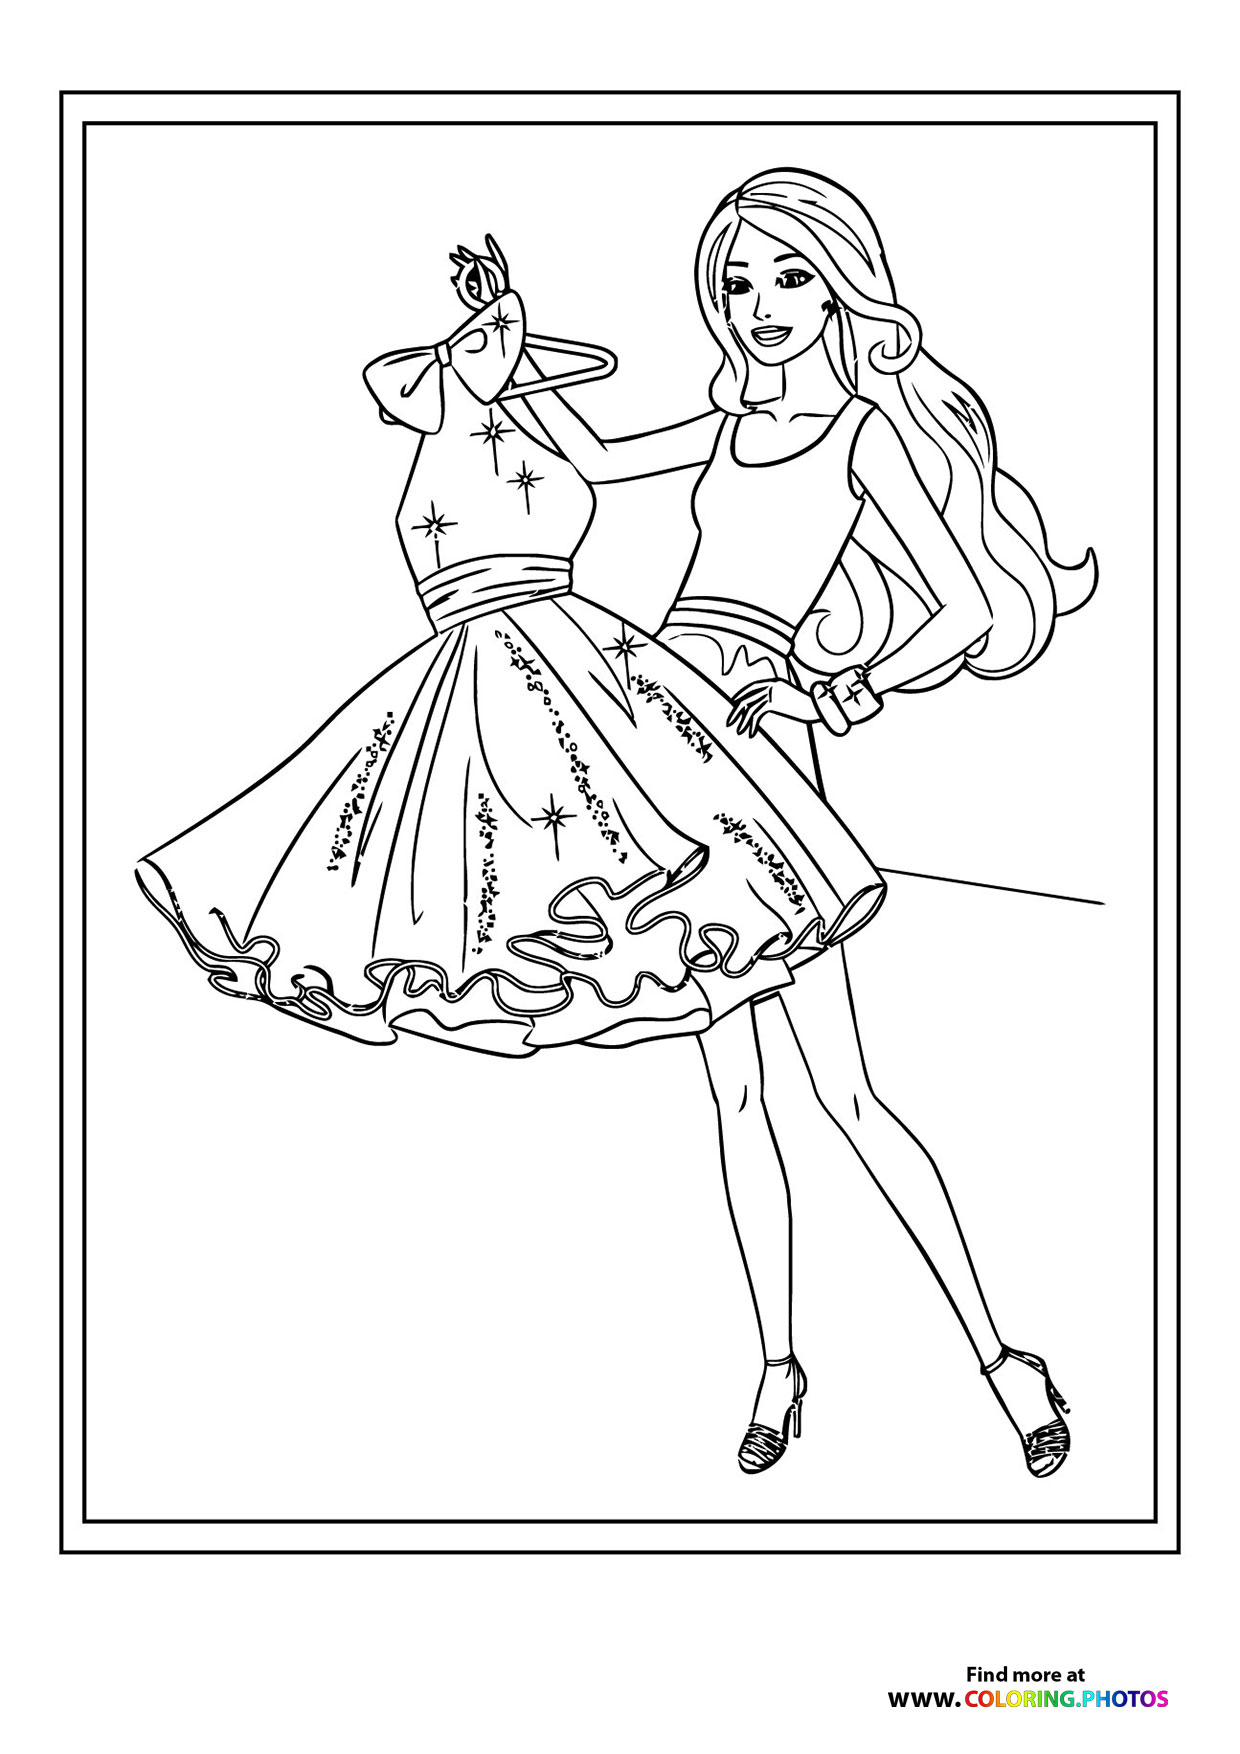 Girl trying dress - Coloring Pages for kids